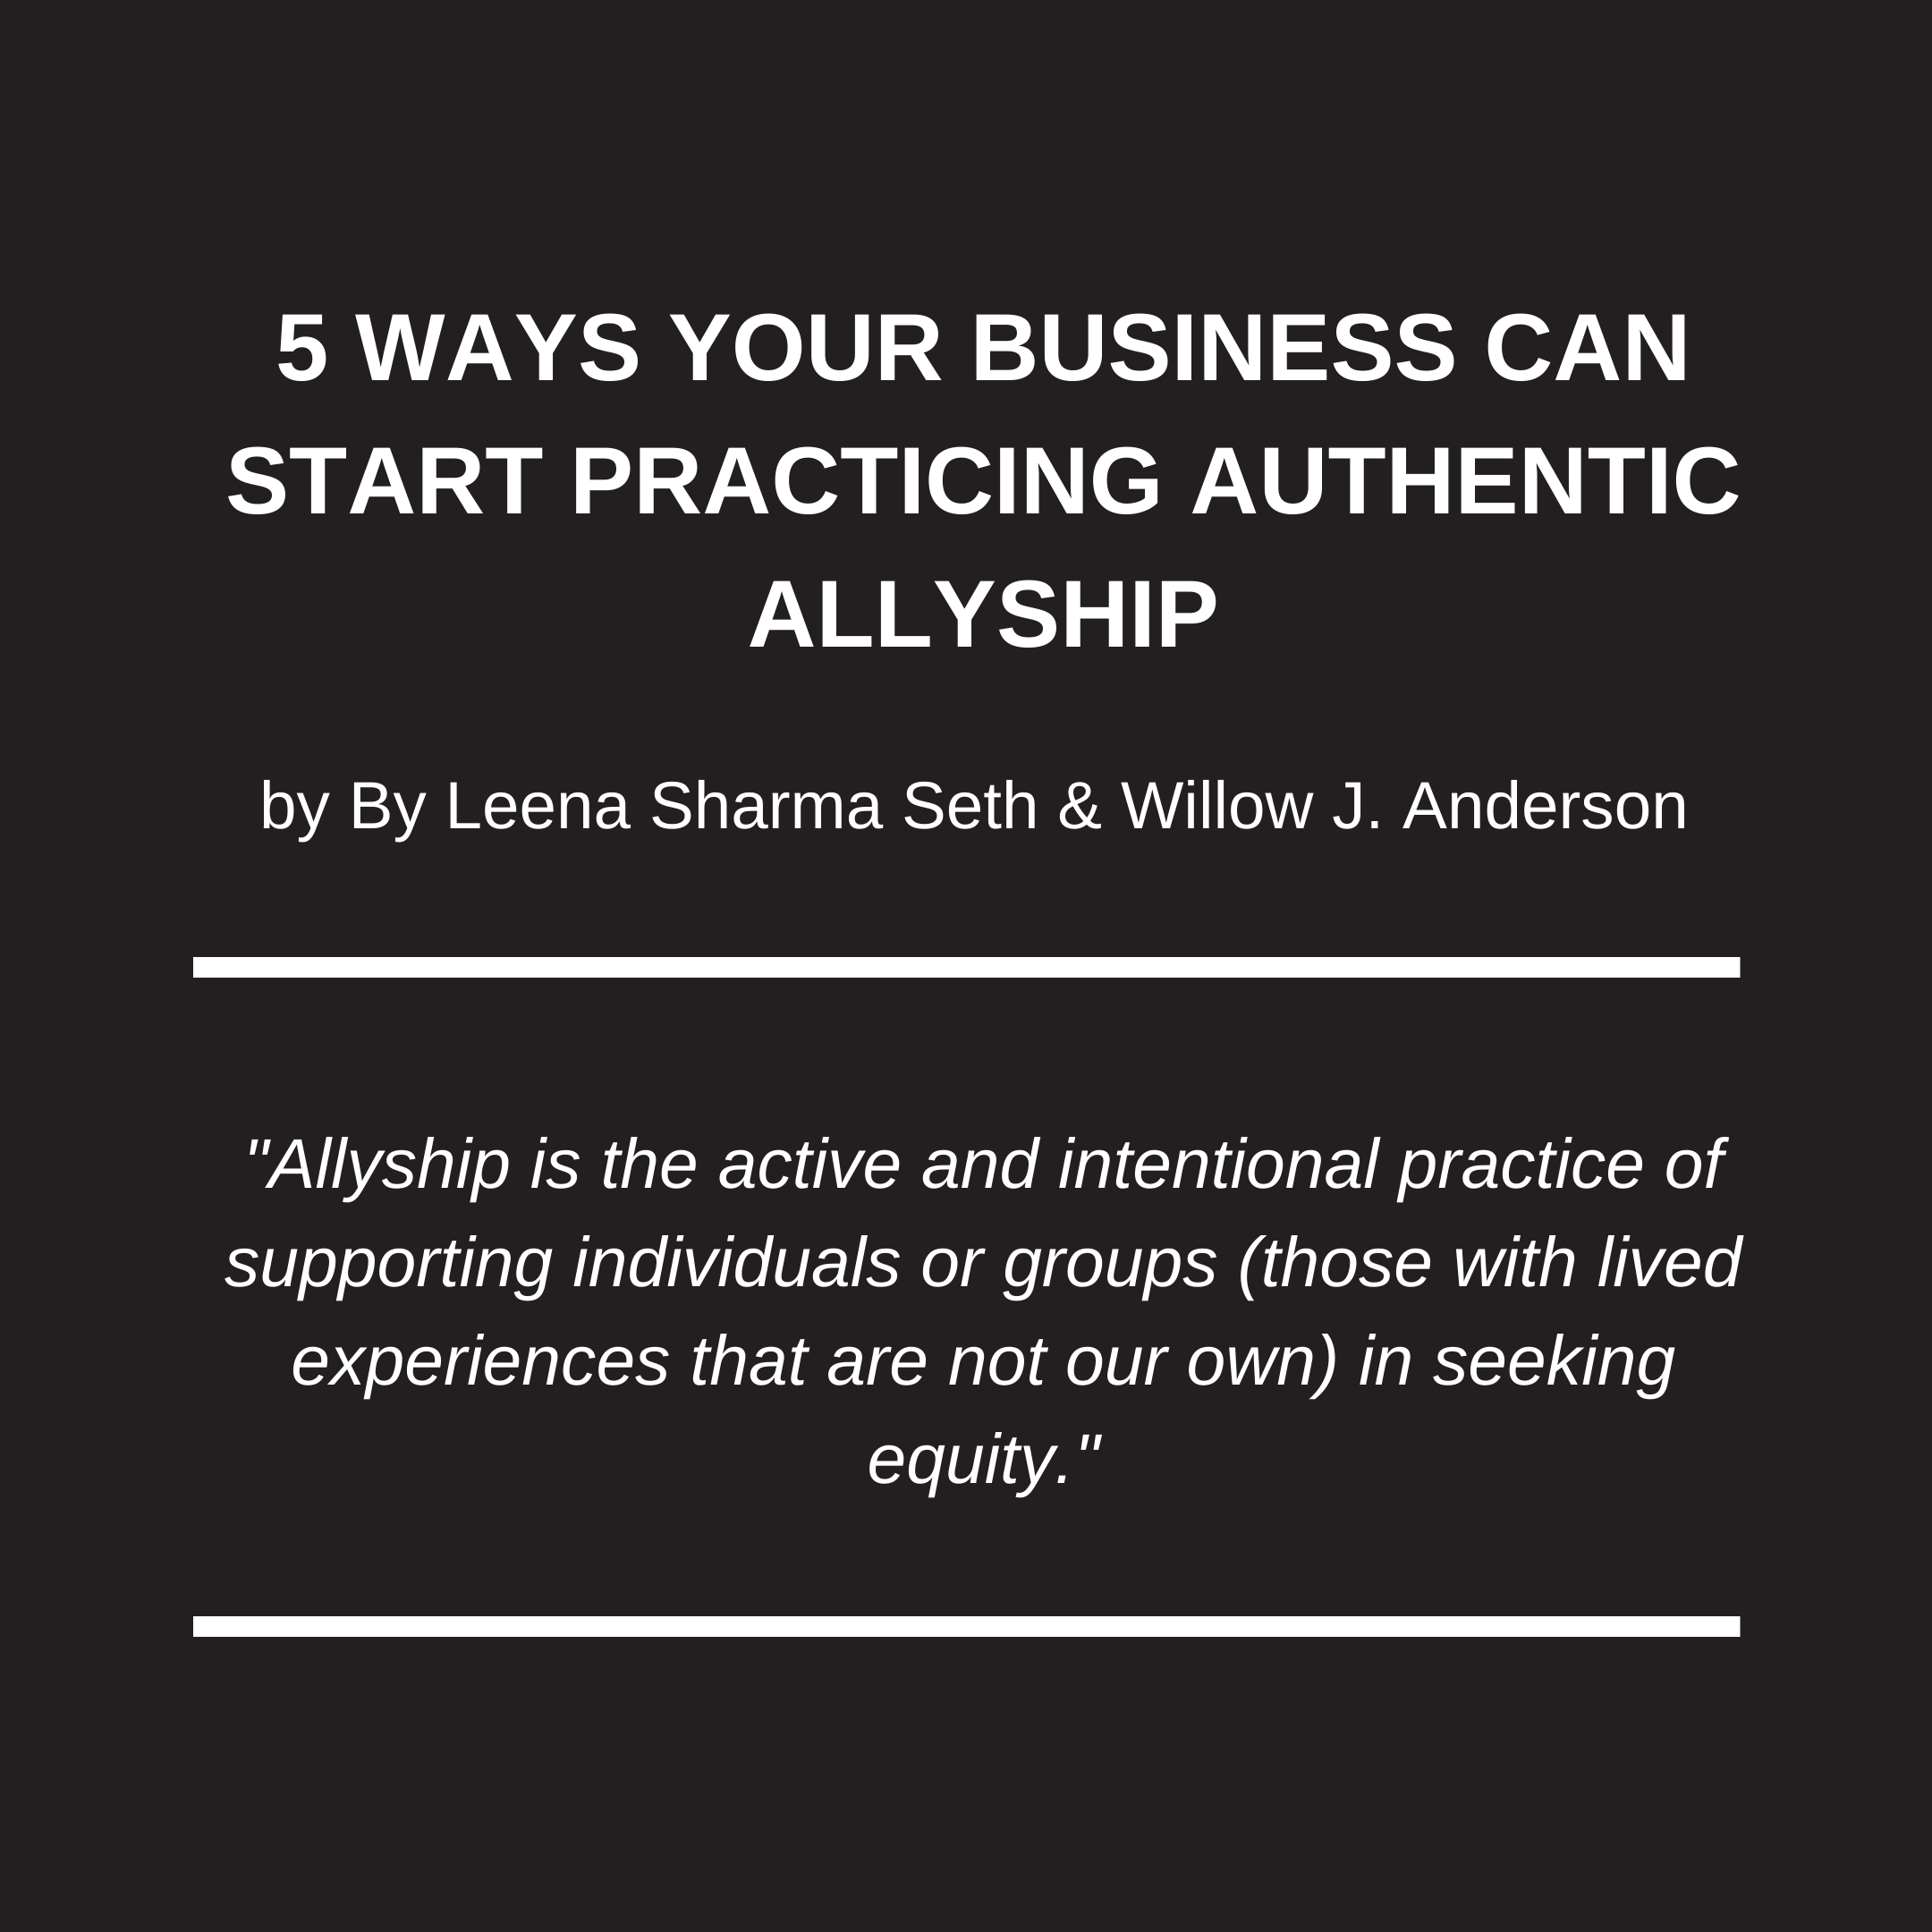 January 26 | 5 Ways Your Business Can Start Practicing Authentic Allyship